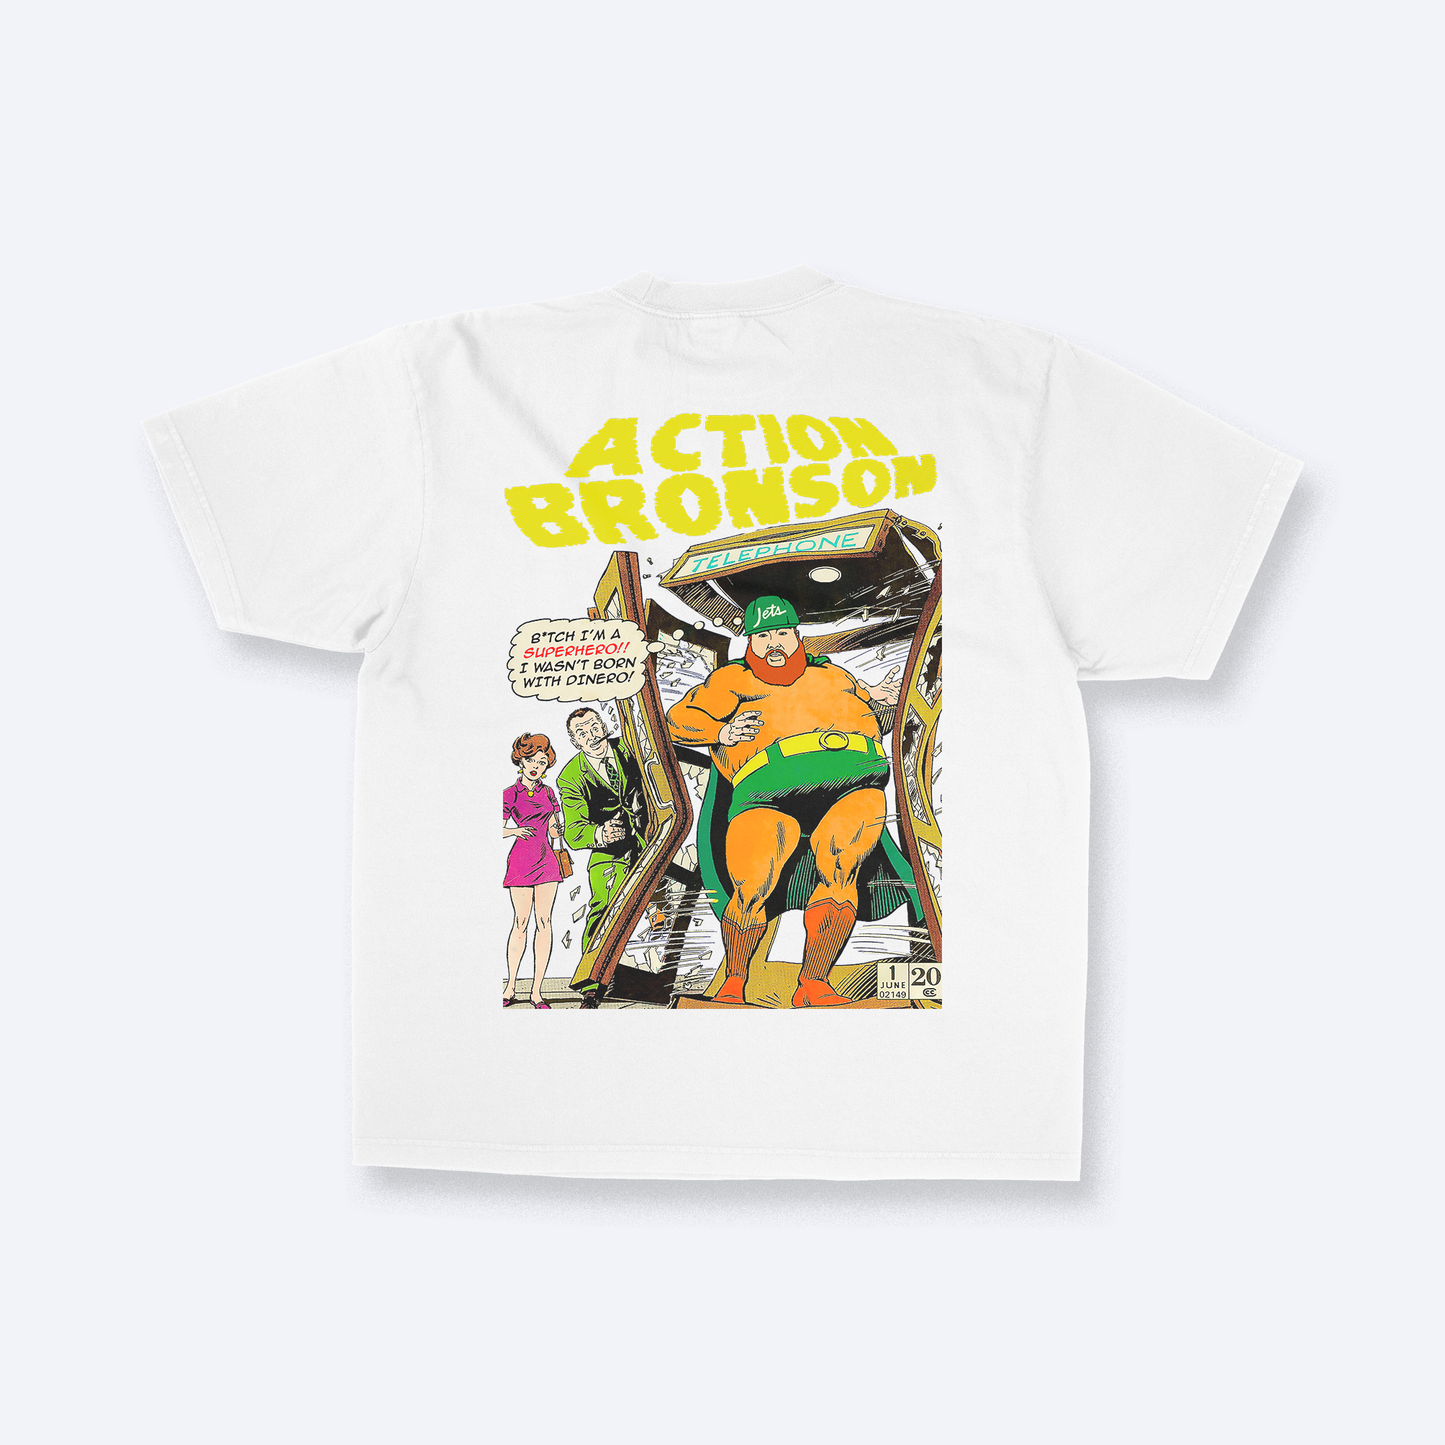 ACTION BRONSON COMIC GRAPHIC TEE - FRONT & BACK PRINT